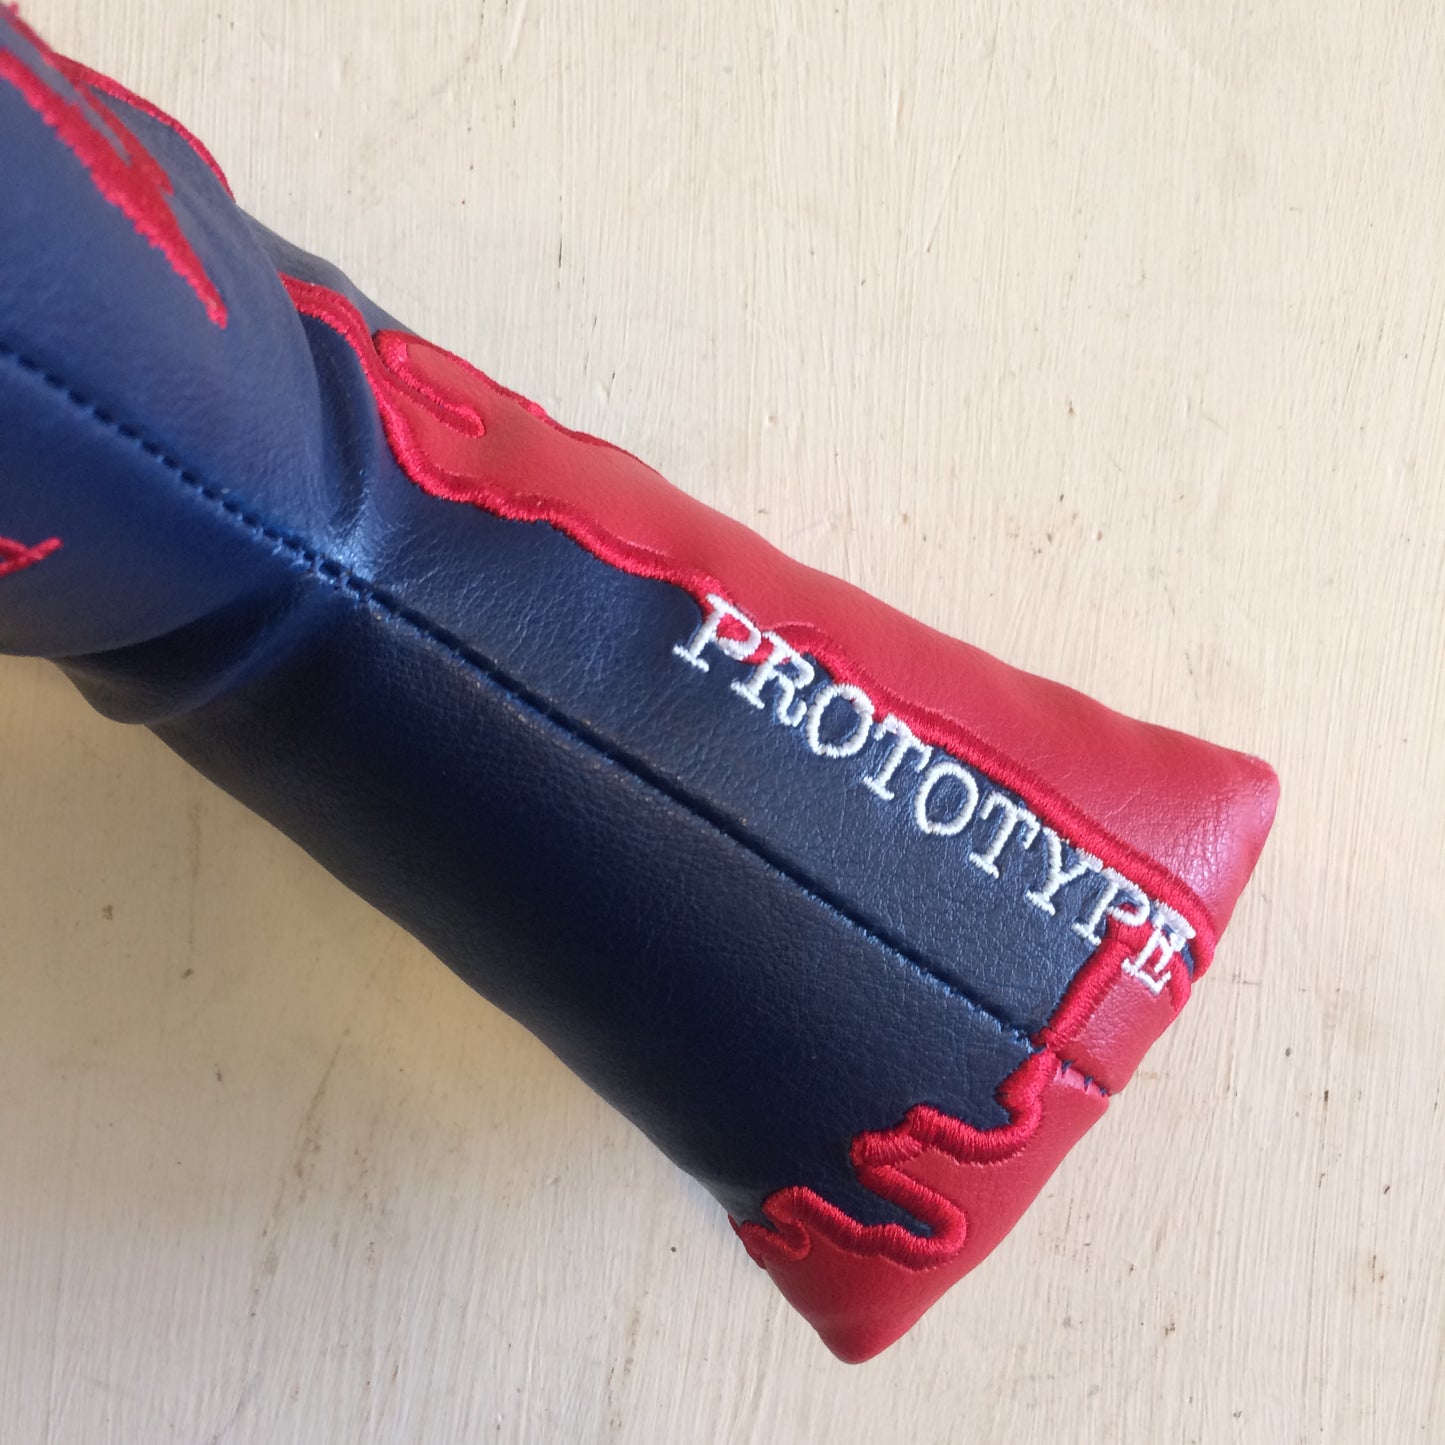 9/11 Tribute Prototype Cover - Red, White, & Blue